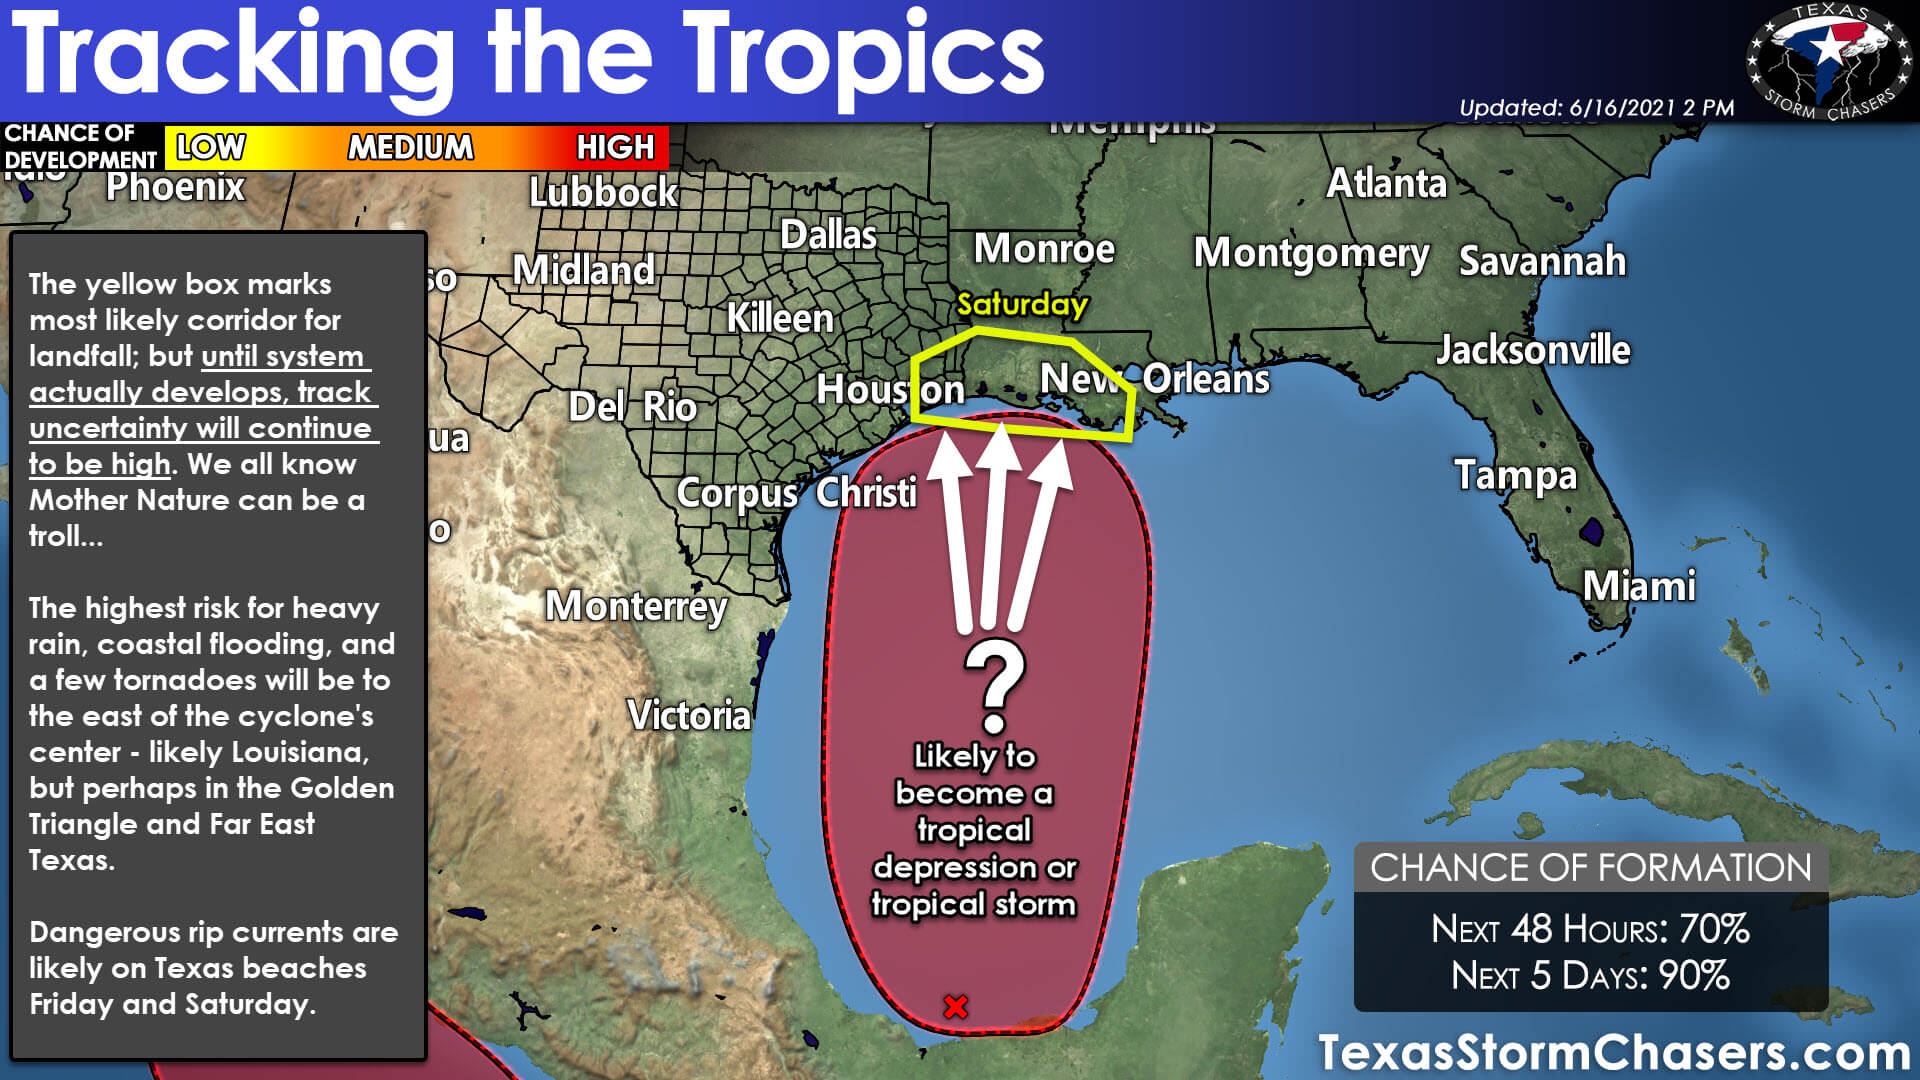 Tropical Depression/Storm likely to form by Friday in Western Gulf of Mexico